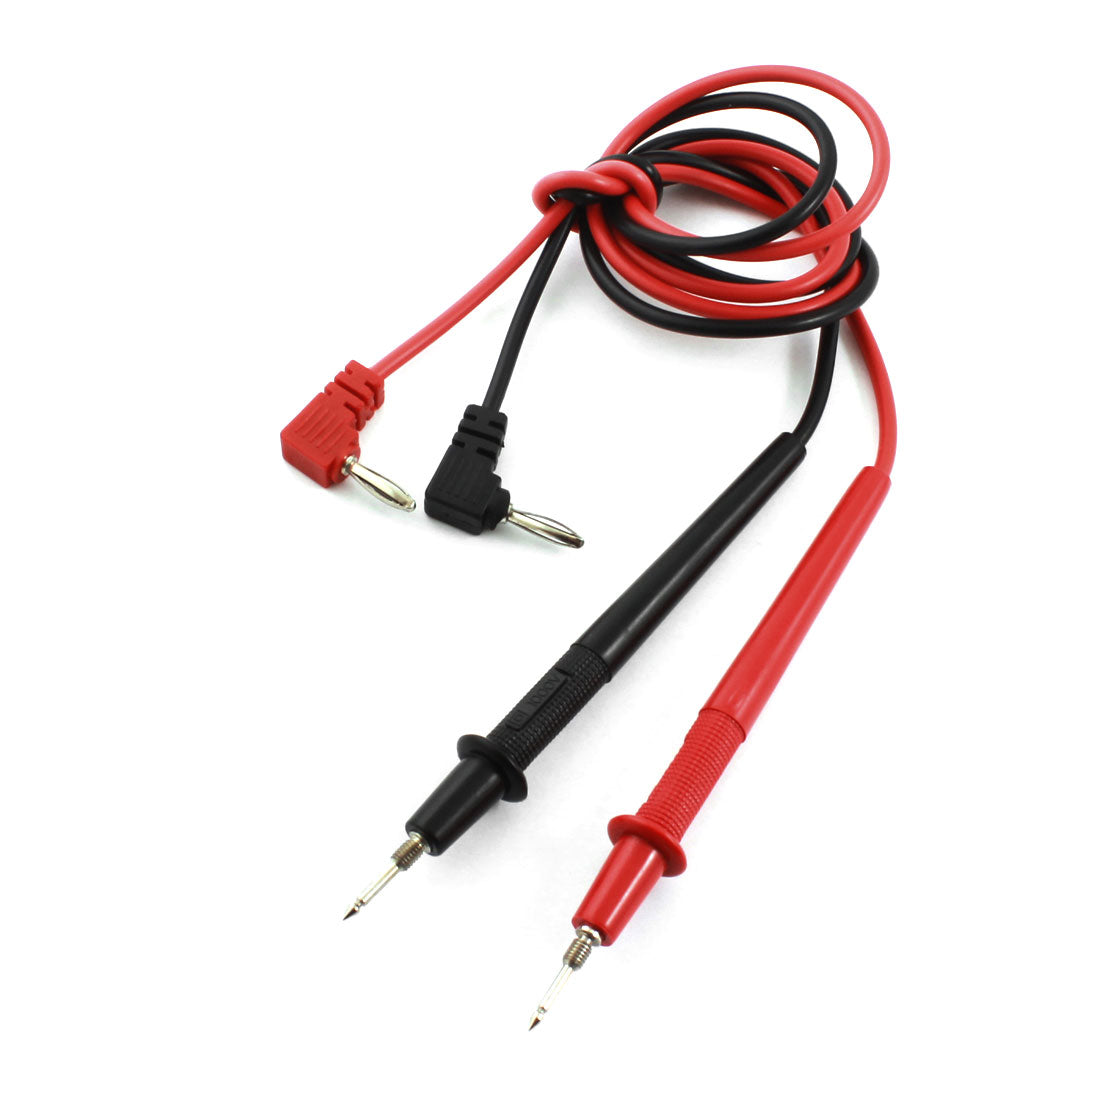 uxcell Uxcell Pair Universal Probe Test Lead Pen Cable 80cm for Multimeter